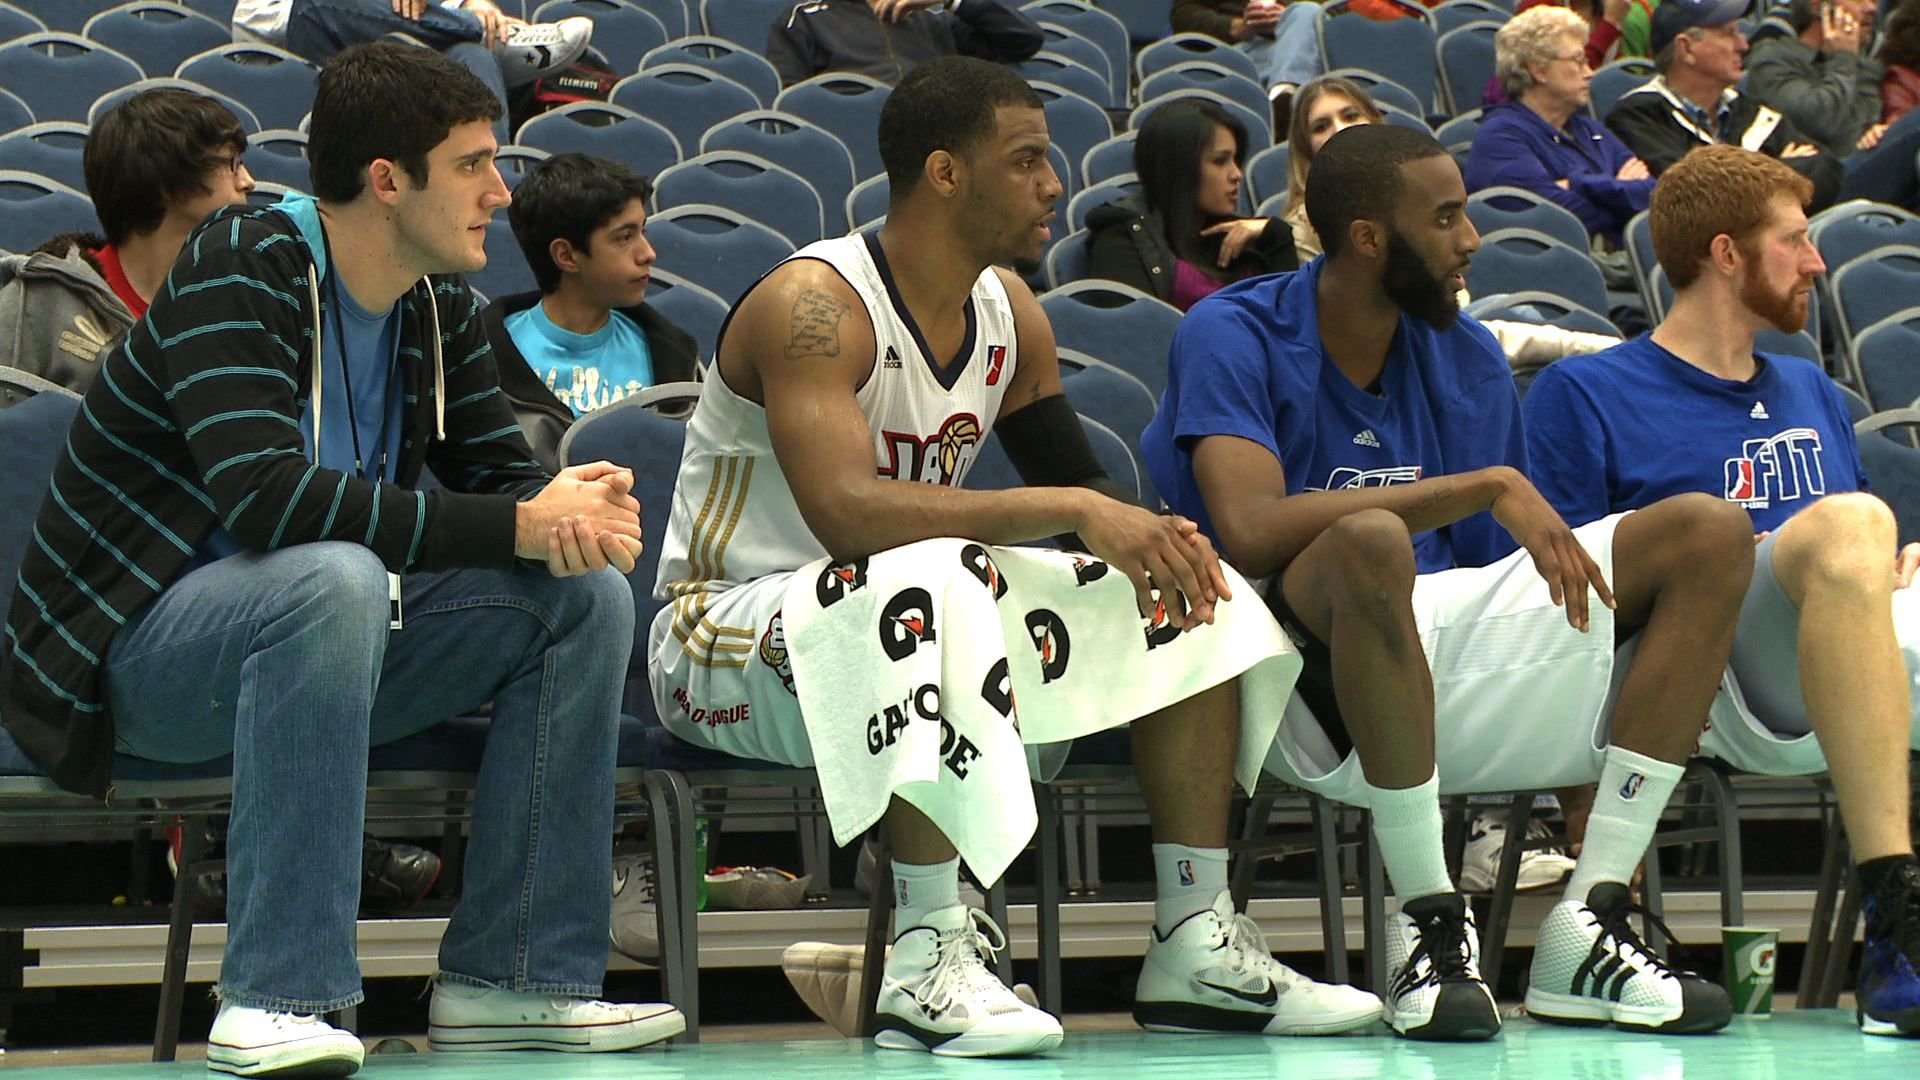 Jeff Camarra and Trey Johnson sit on the bench during the 2011 NBA D-League Showcase.